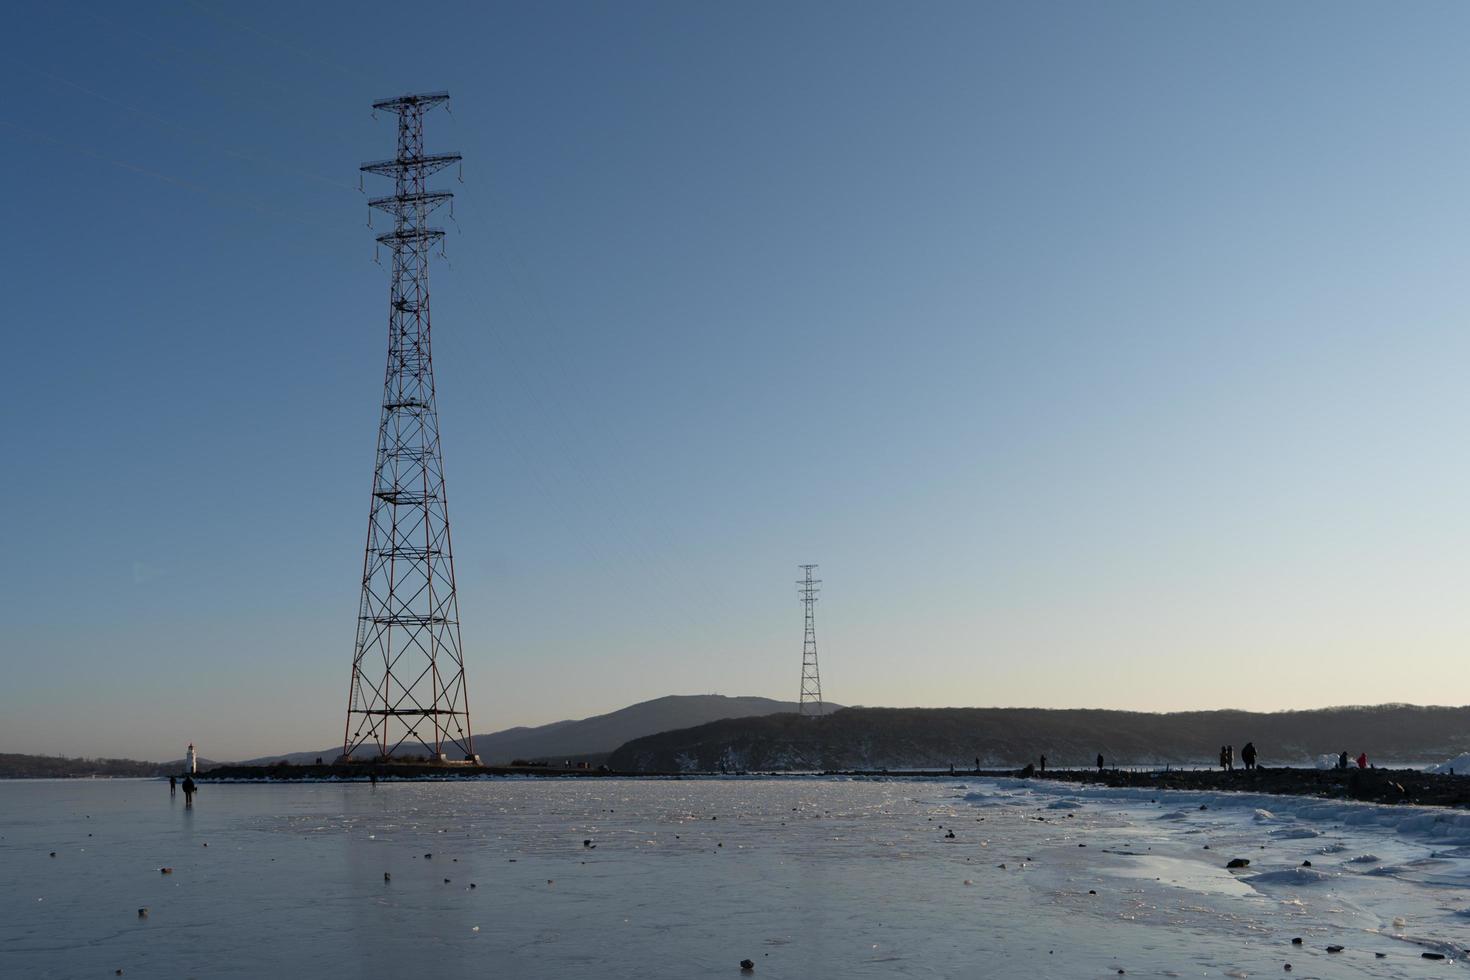 Seascape of water and mountains with electricity transmission towers in Vladivostok, Russia photo